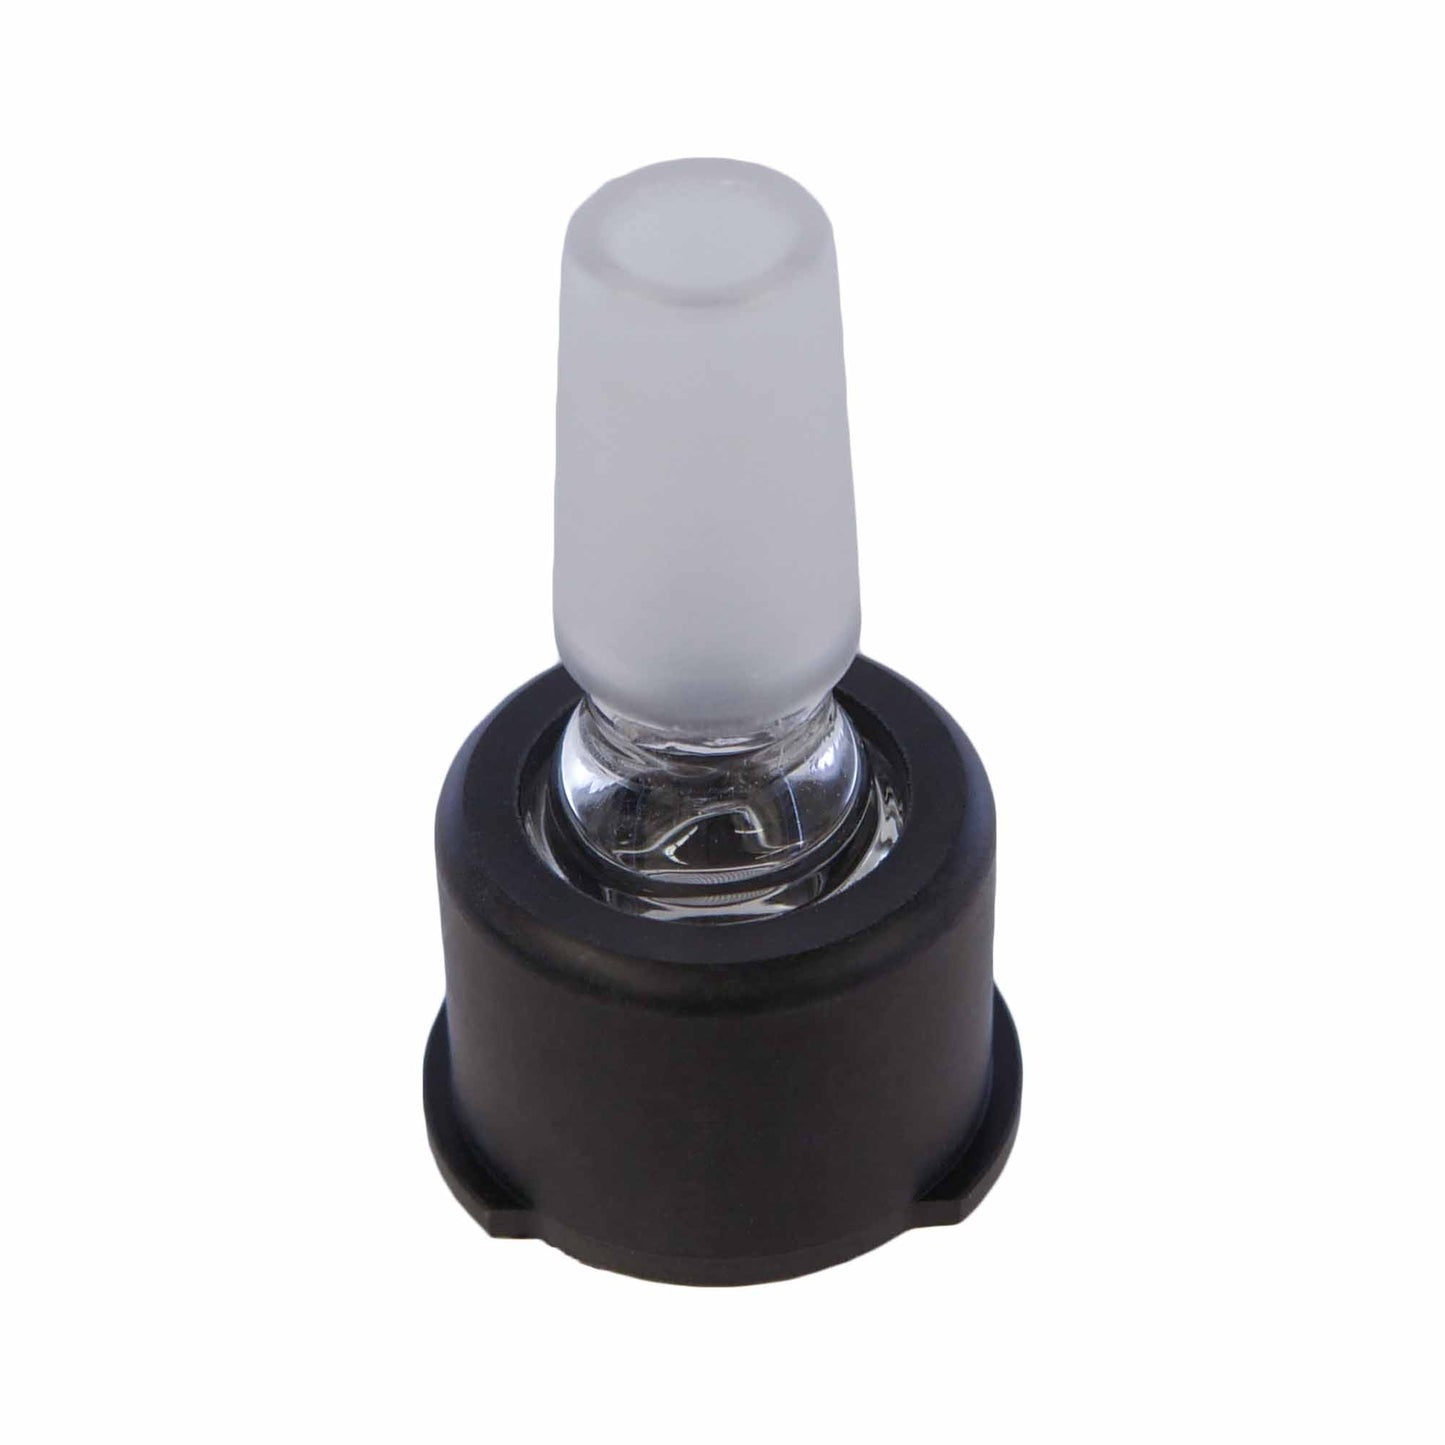 Mighty / Crafty 14mm Water Adapter Vaporizers Custom Accessories 